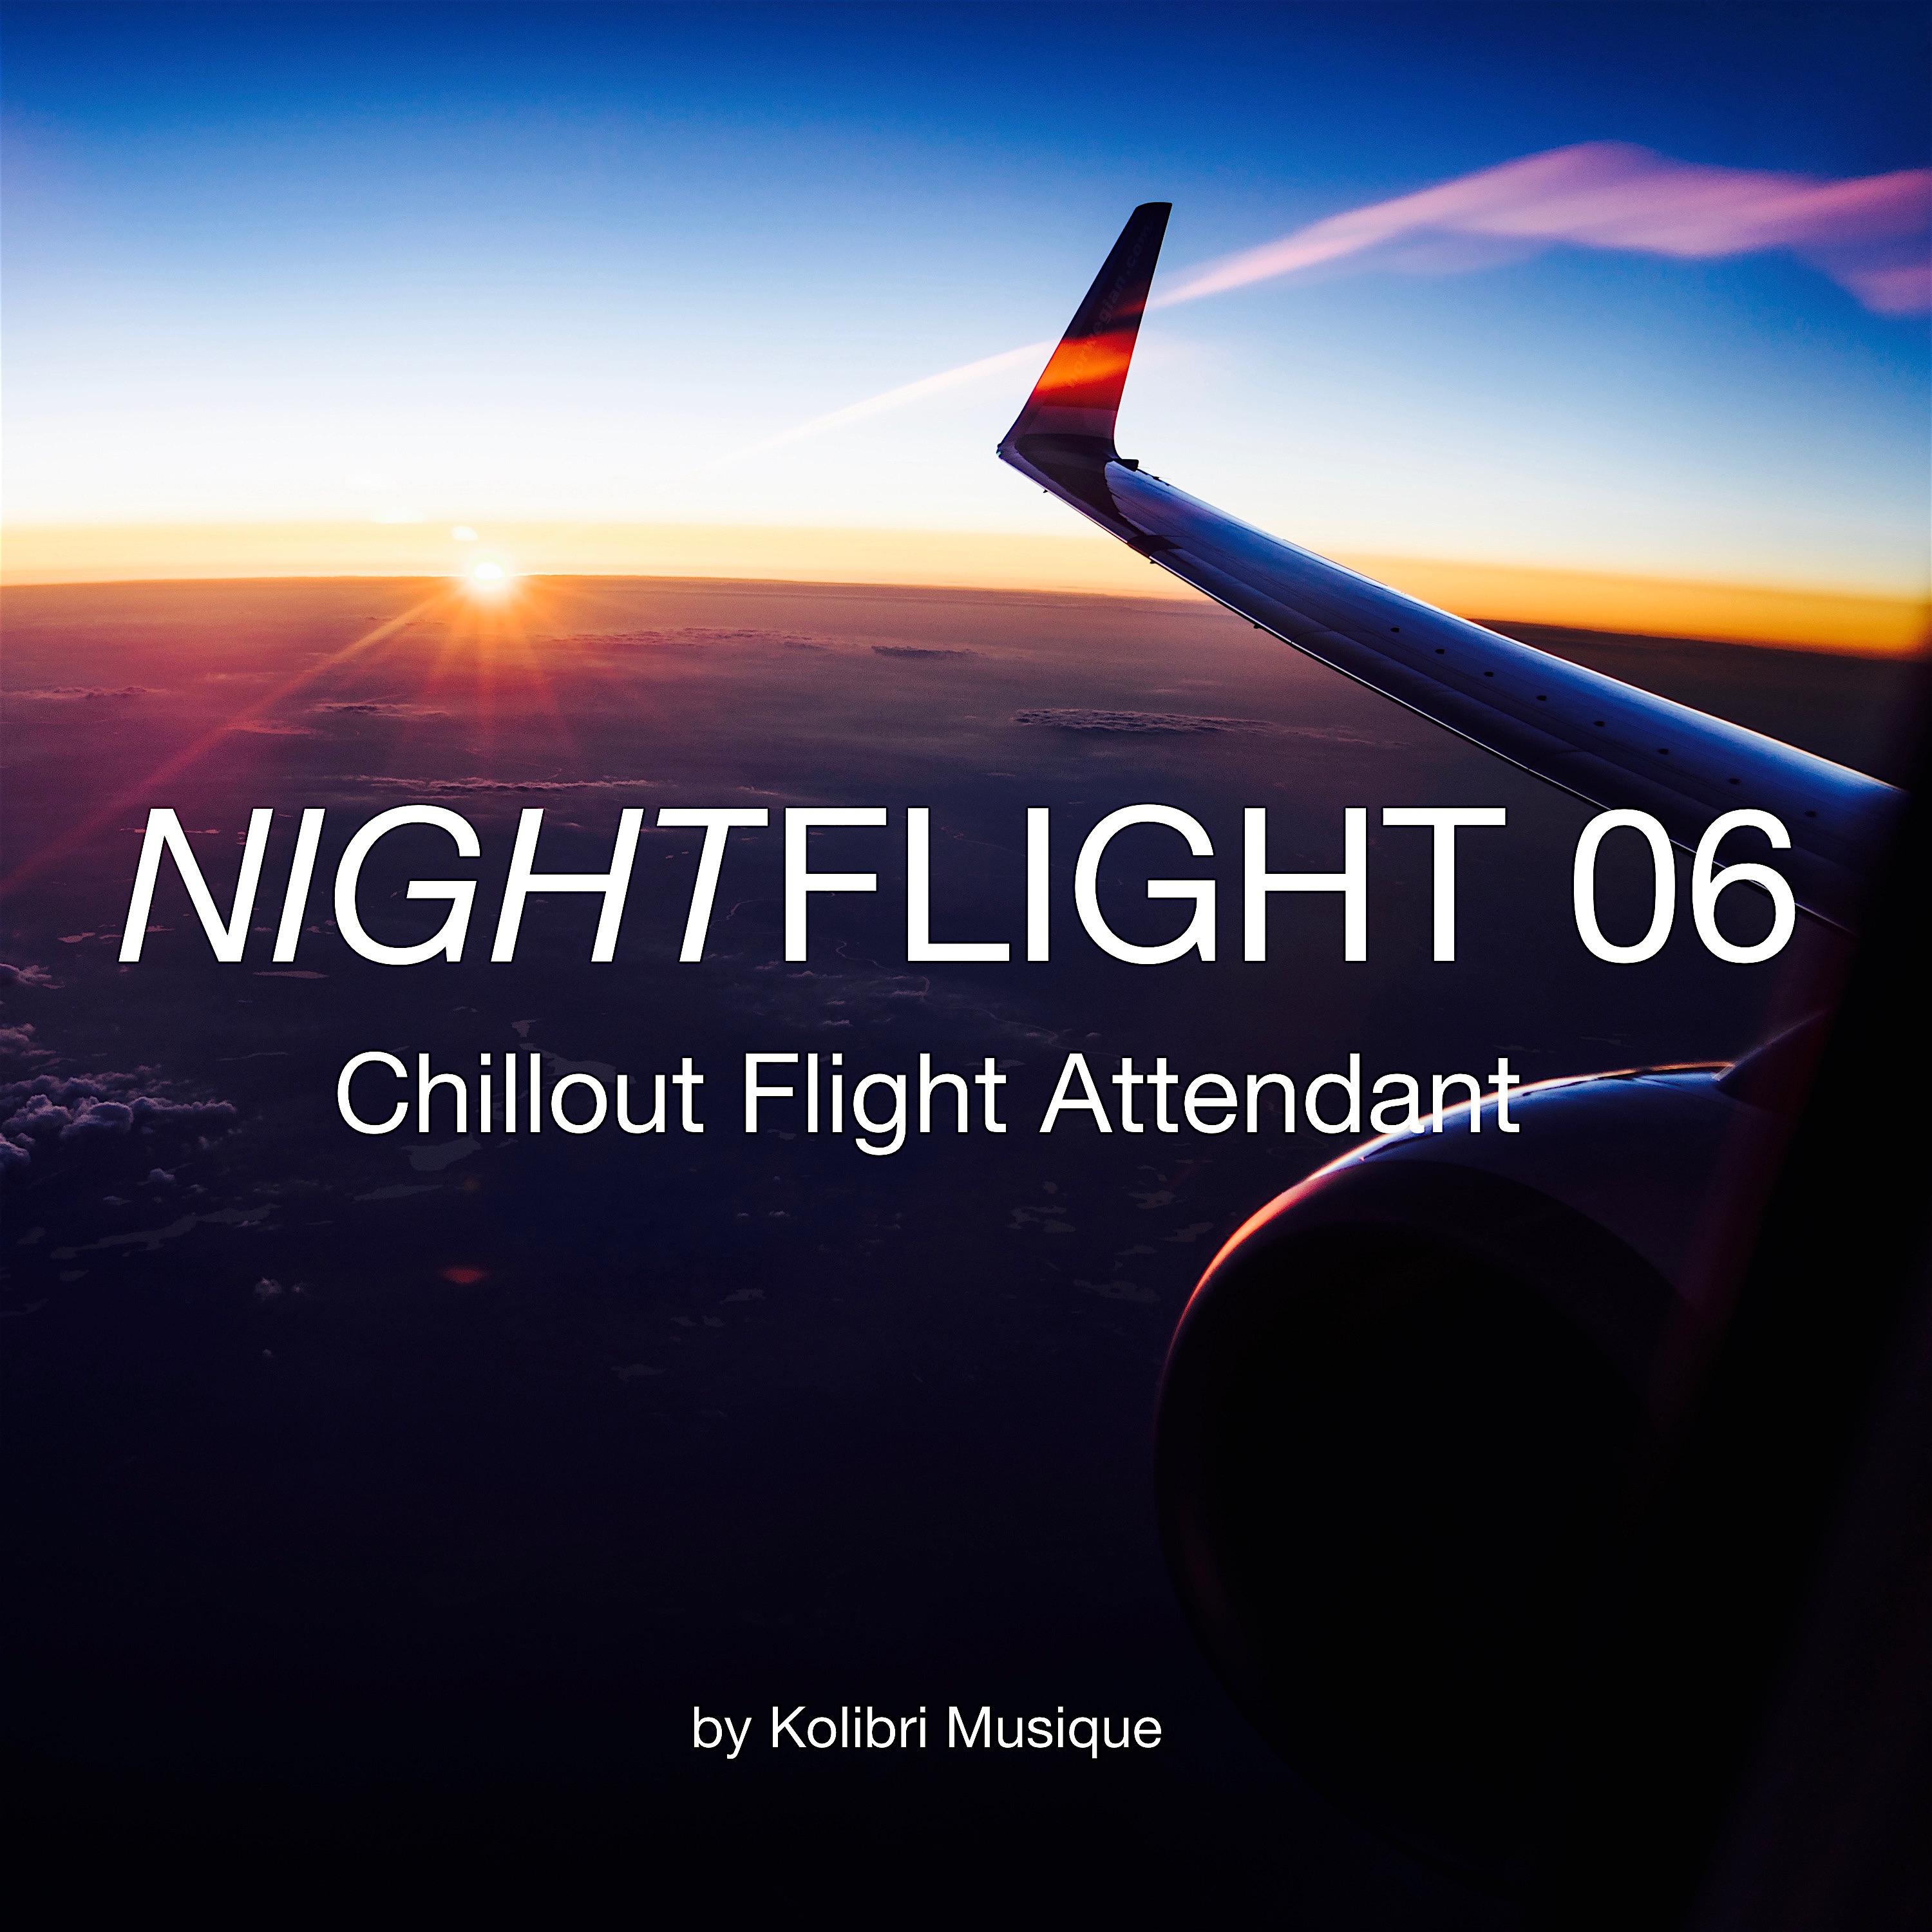 Nightflight 06 Chillout Flight Attendant (Compiled and Mixed by Kolibri Musique)